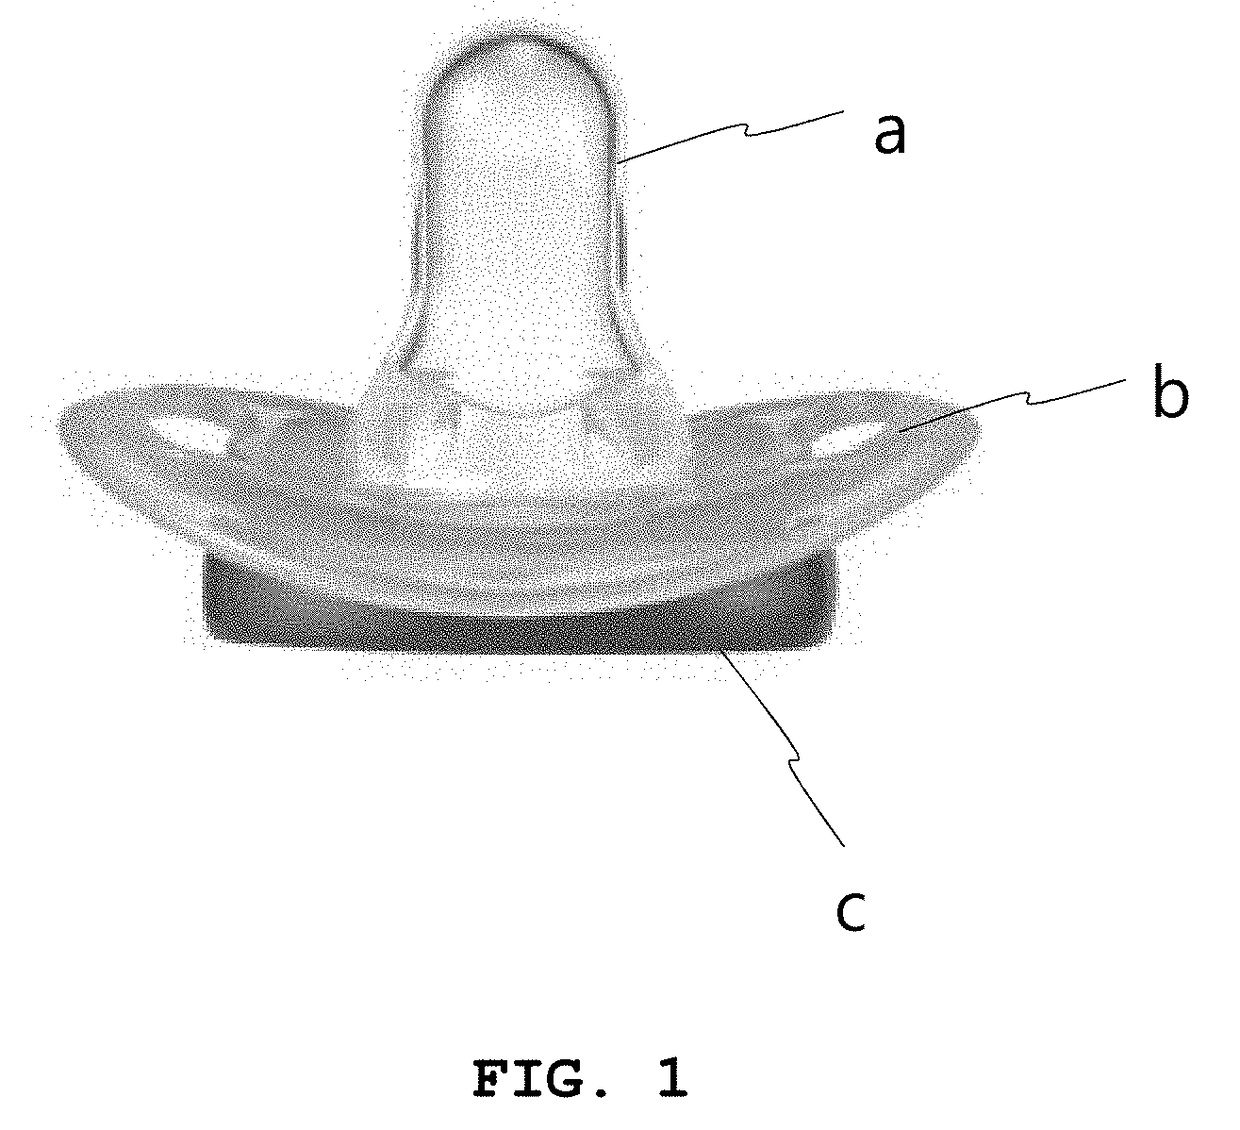 Thermometer-equipped pacifier capable of self-charging using piezoelectric element